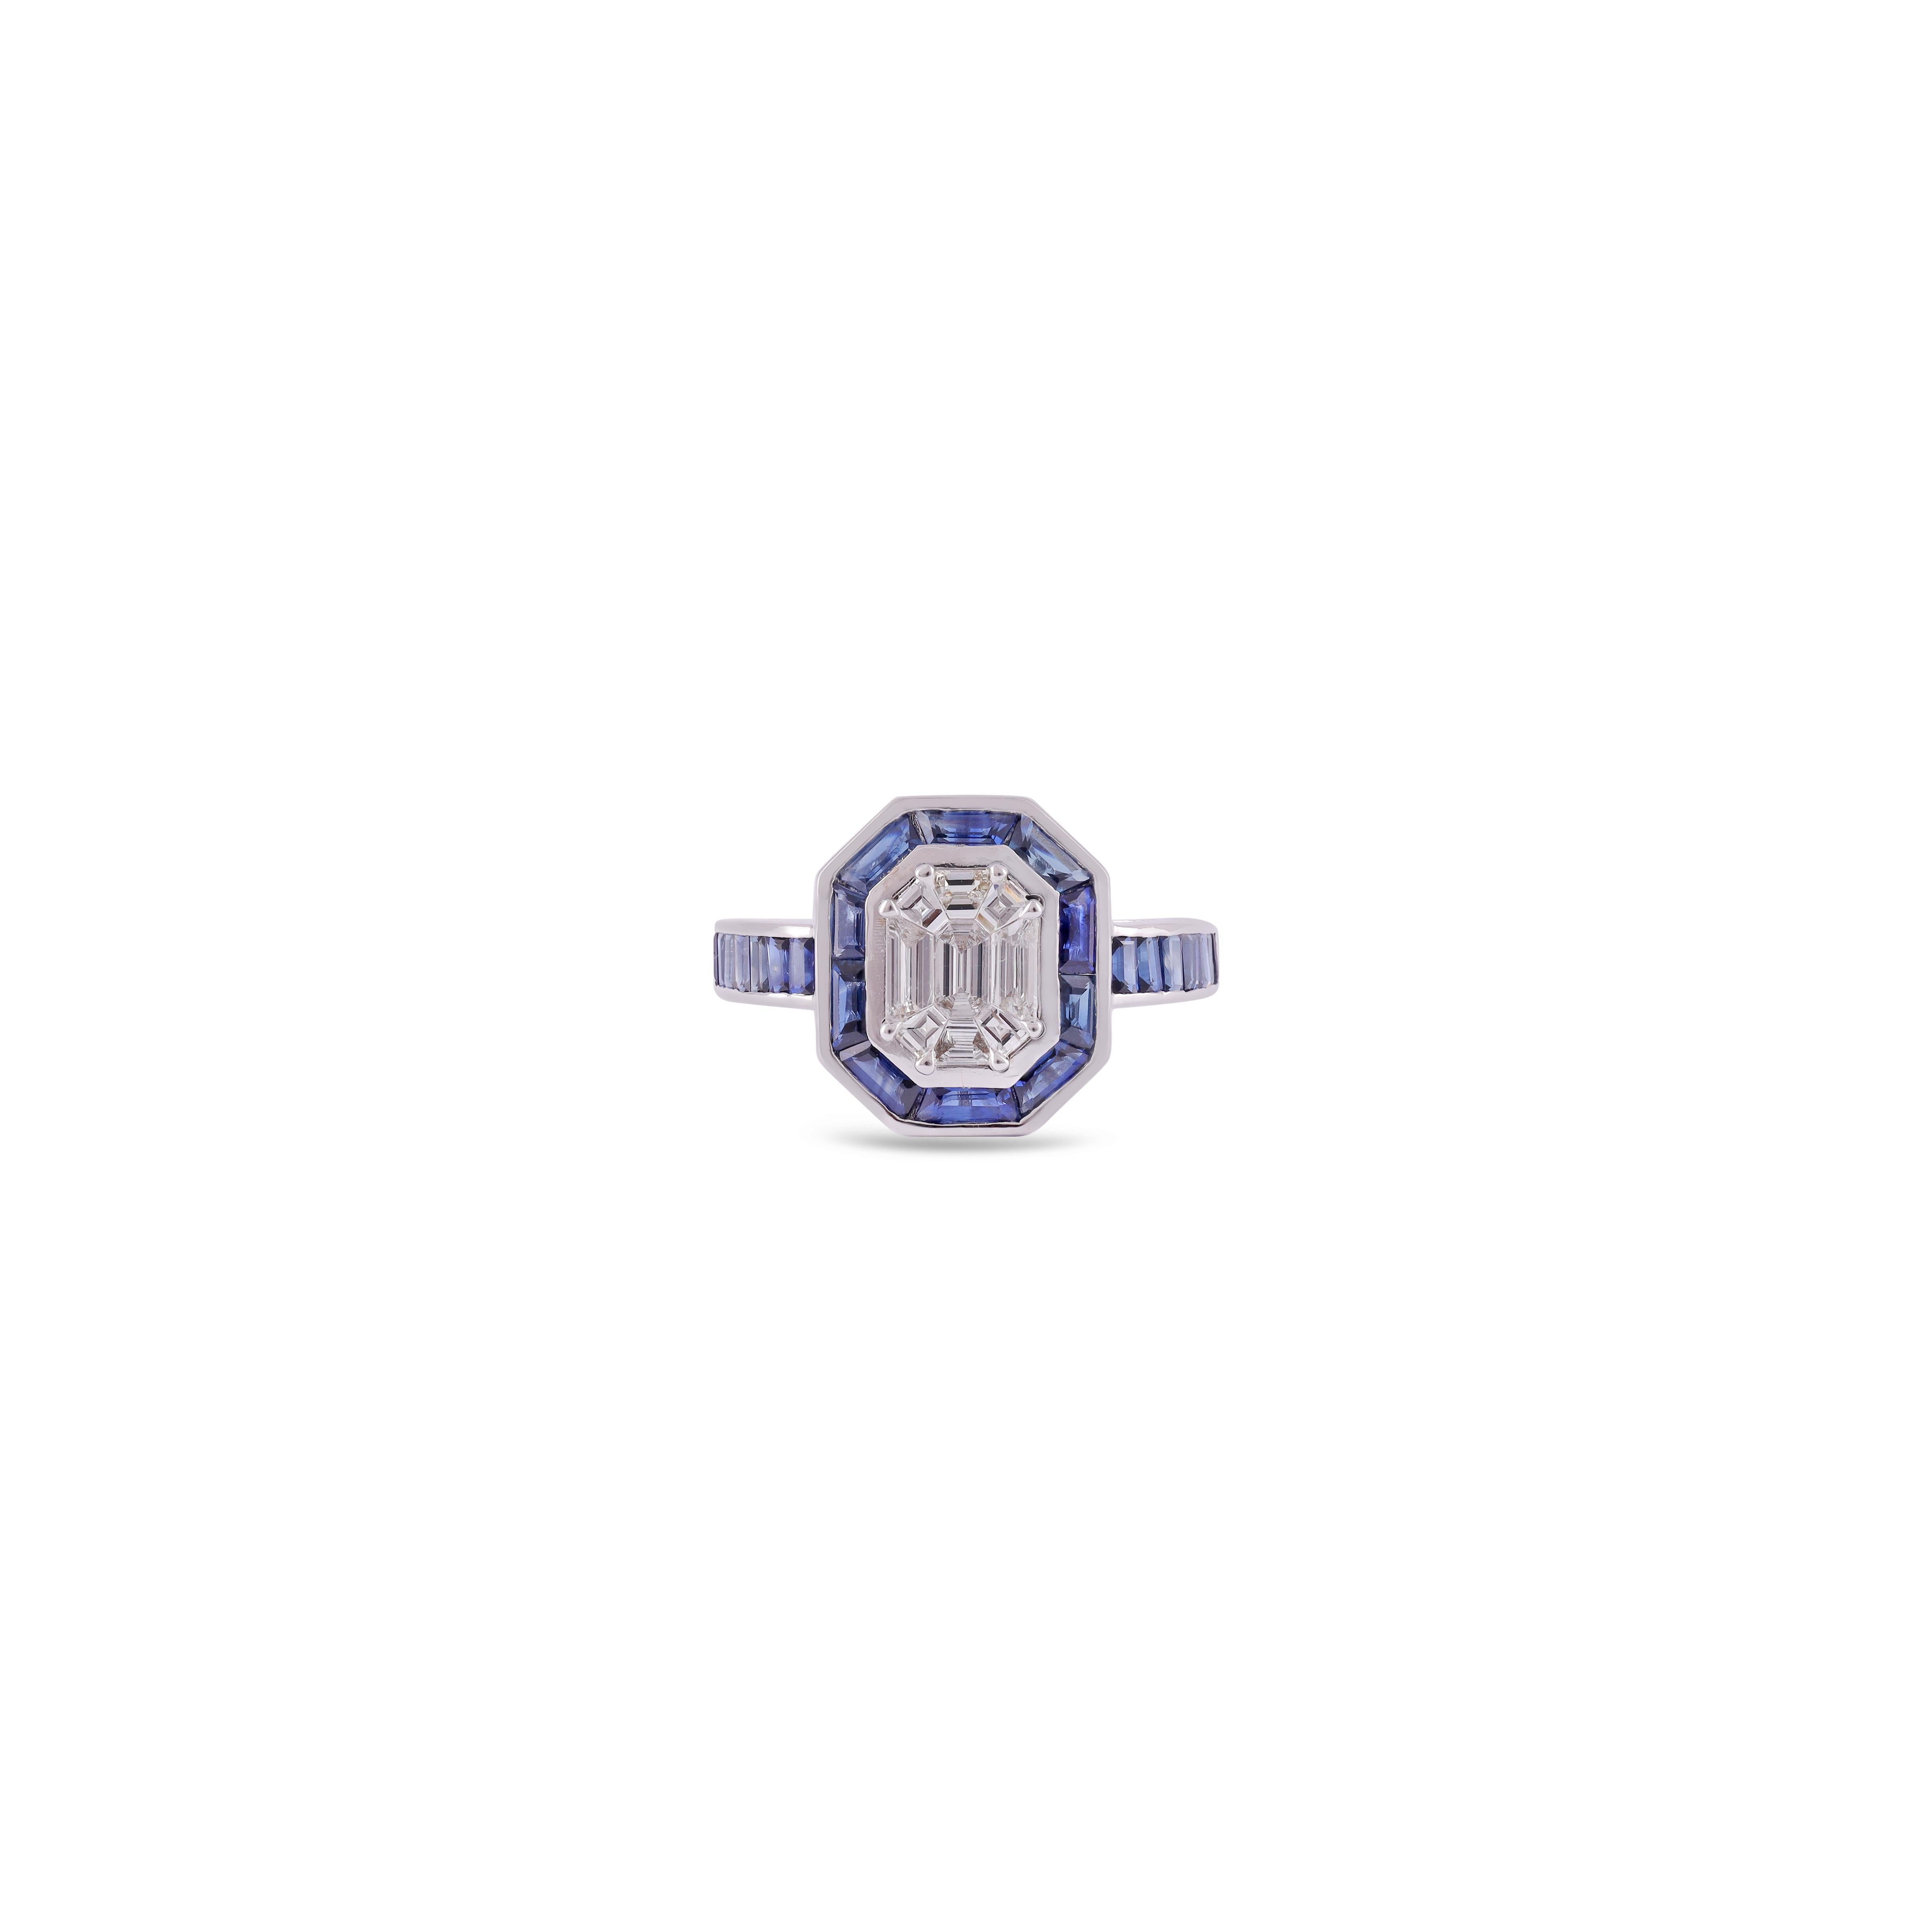 Sapphire = 1.77 Carat
Diamonds = 0.47 Carats
Metal: 18K White Gold
Ring Size: 7* US
*It can be resized 
